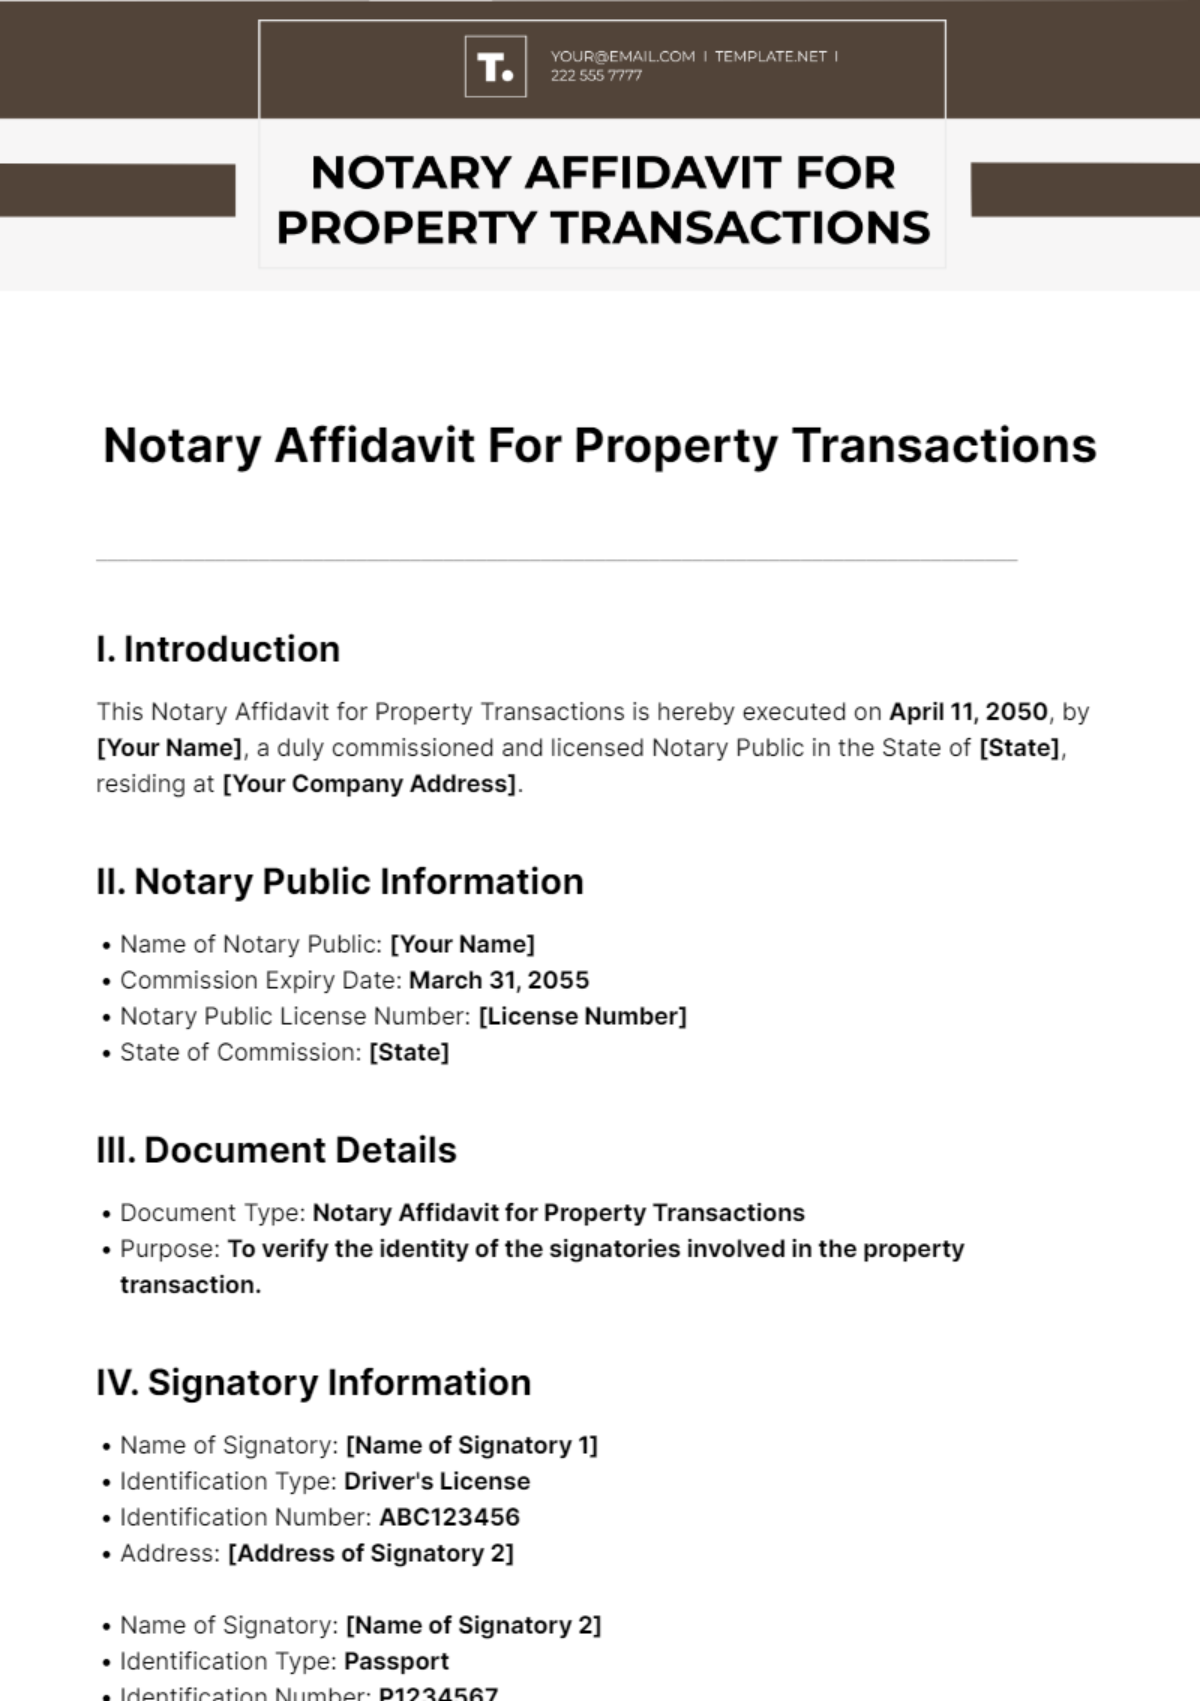 Free Notary Affidavit For Property Transactions Template